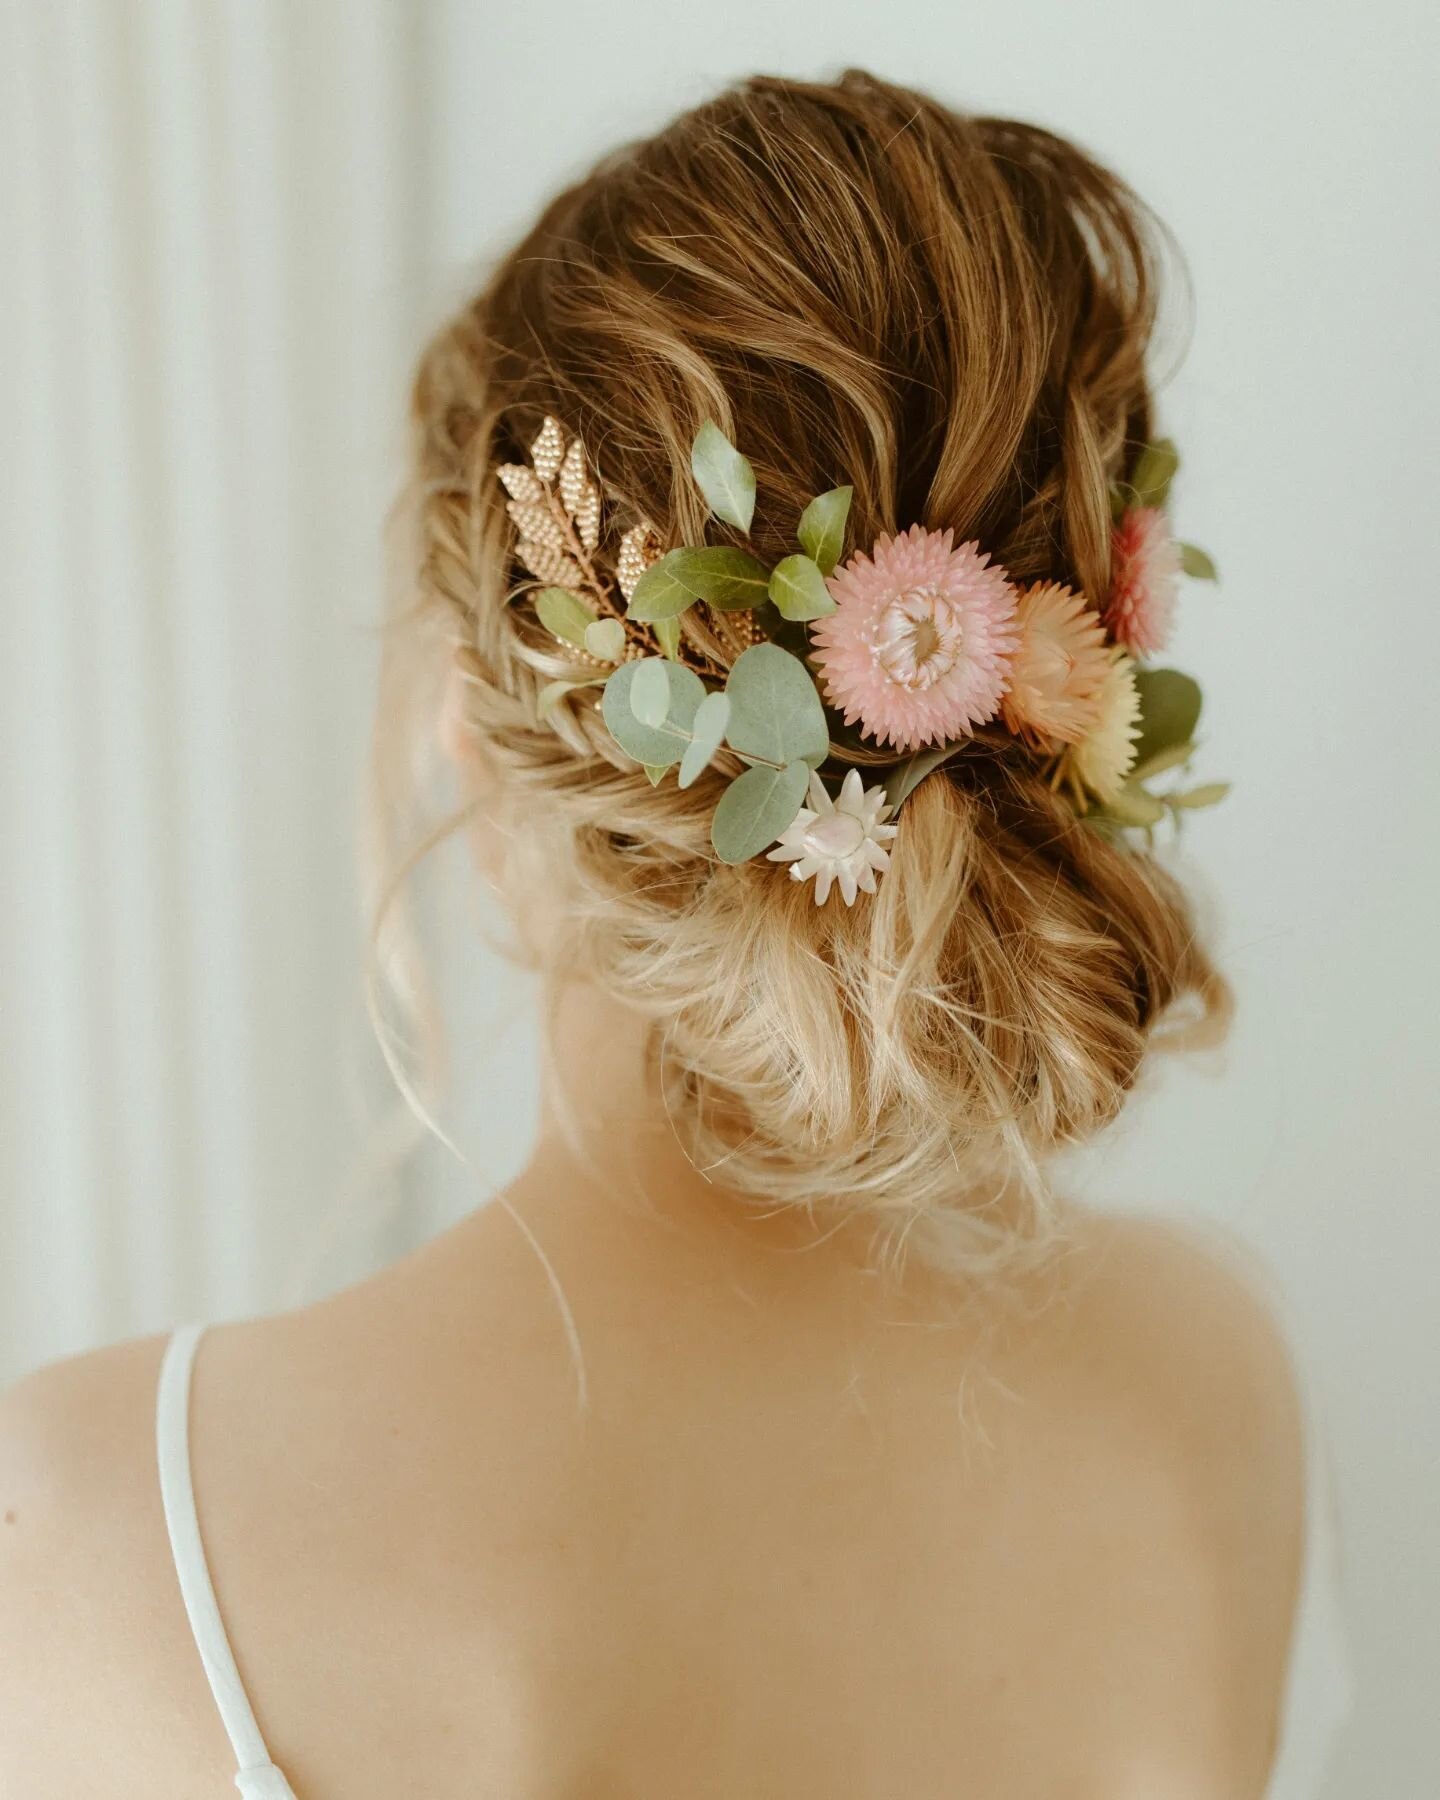 Q. When Should I Book My Wedding Hairstylist?

A. If you're getting married in the summer months then ASAP. Especially if it's a Saturday! I take bookings as far as 18 months in advance and most summer Saturdays are booked 12 months or more in advanc